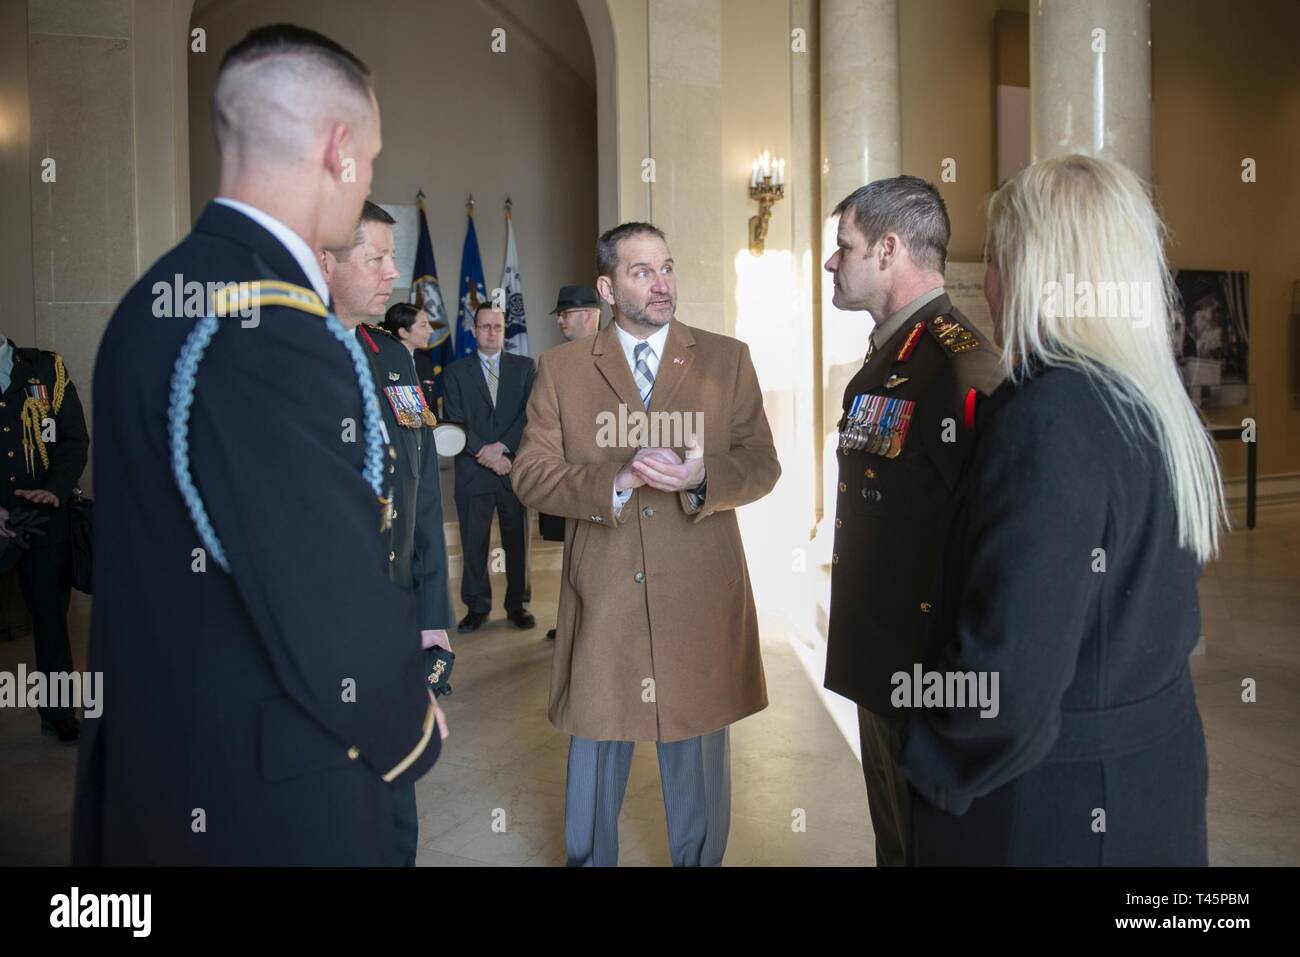 (From left) U.S. Army Capt. Victor Farrar, commander of the guard, U.S. Infantry Regiment (The Old Guard); Col. Alan Mulawyshyn, Canadian Armed Forces; Michael Migliara, director of operations, Arlington National Cemetery; Lt. Gen. M.N. (Mike) Rouleau, commander, Canadian Joint Operations Command; and his partner, Andrea Themely; speak in the Memorial Amphitheater Display Room at Arlington National Cemetery, Arlington, Virginia, March 6, 2019. While at ANC, Rouleau participated in a Public Wreath-Laying Ceremony at the Tomb of the Unknown Soldier and toured the Memorial Amphitheater Display Ro Stock Photo